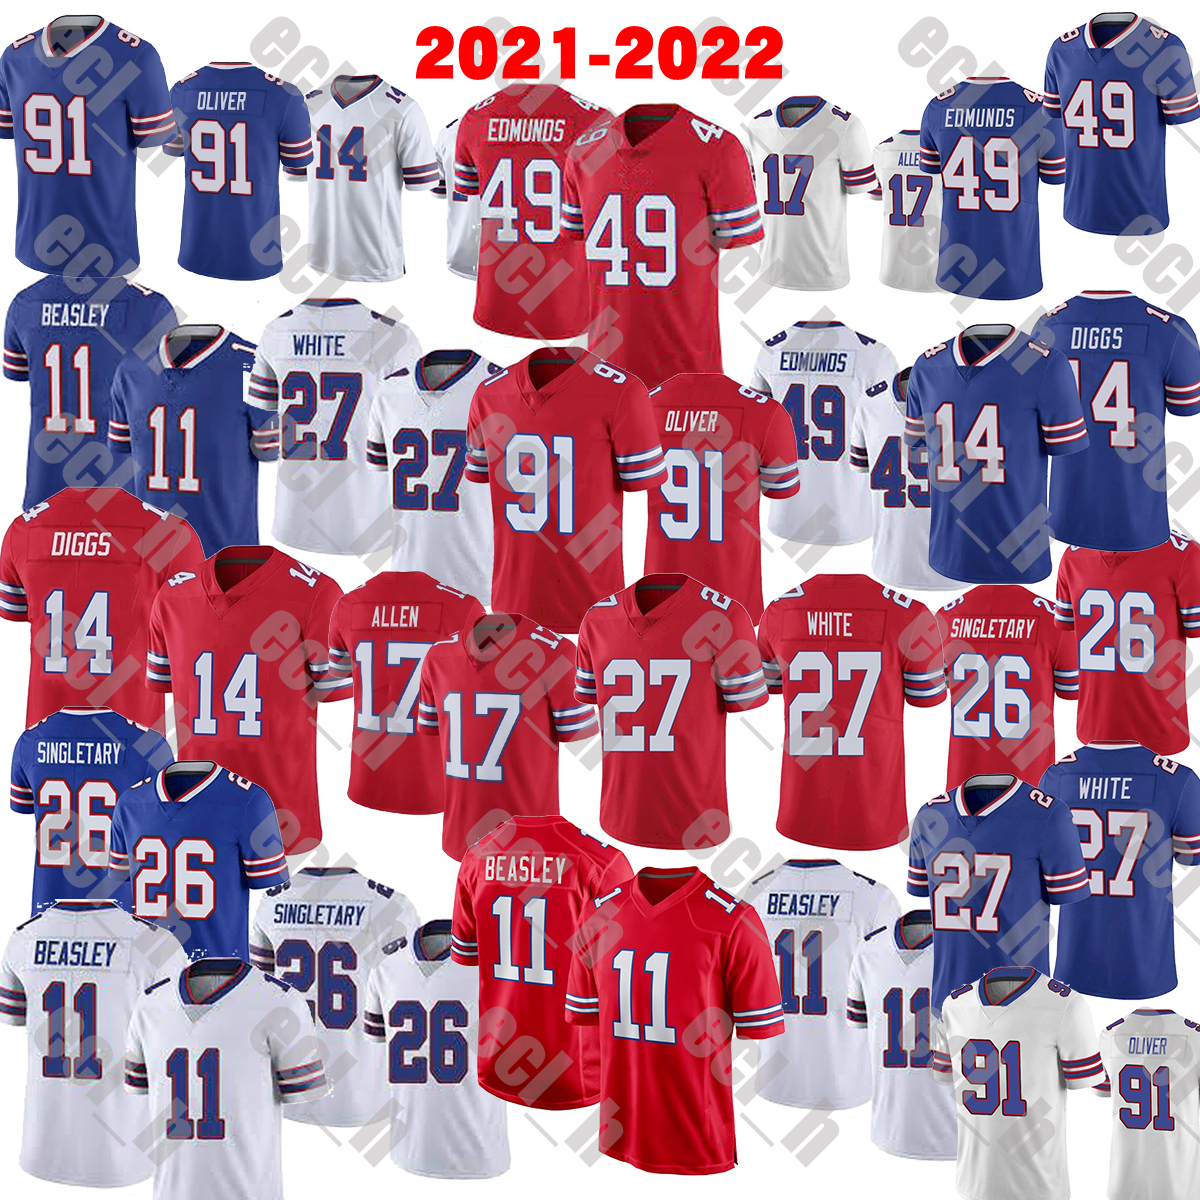 

2021-2022 High quality Stitched Football jerseys 11 Cole Beasley 14 Stefon Diggs 17 Josh Allen 26 devin Singletary 27 tre'davious white 49 tremaine edmunds 91 ed oliver, As